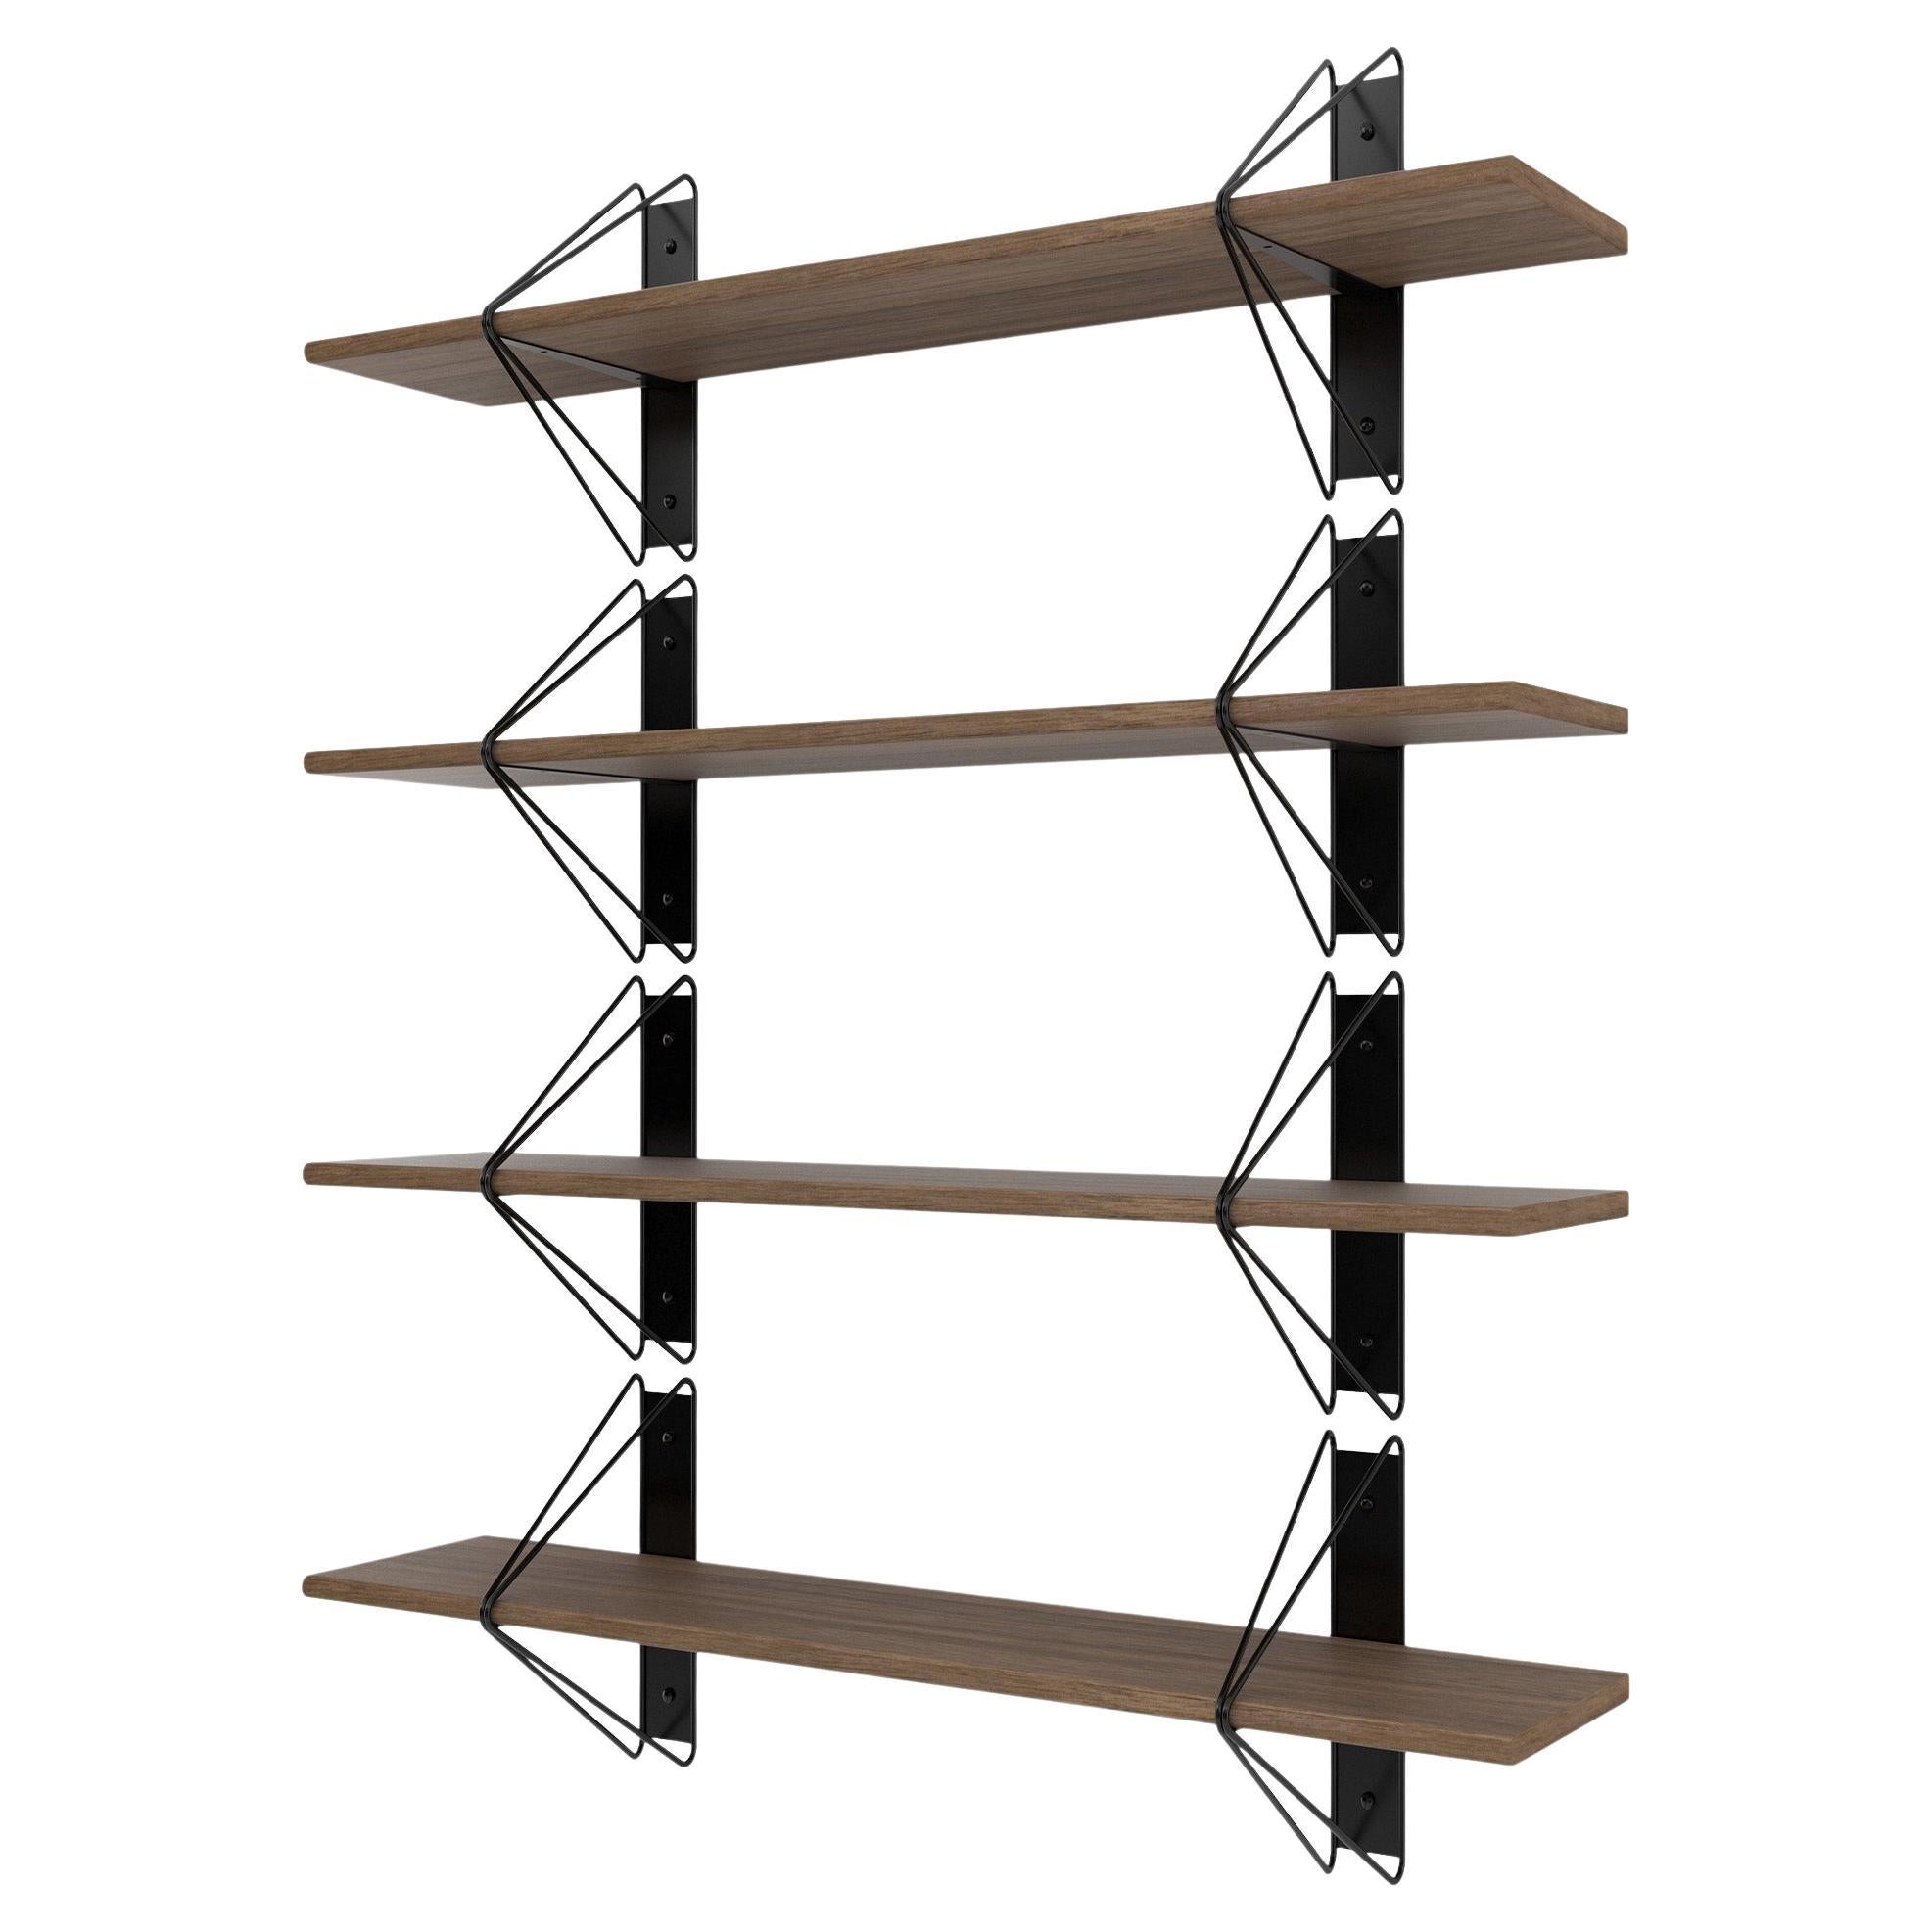 Set of 4 Strut Shelves from Souda, 52in, Black and Walnut, Made to Order